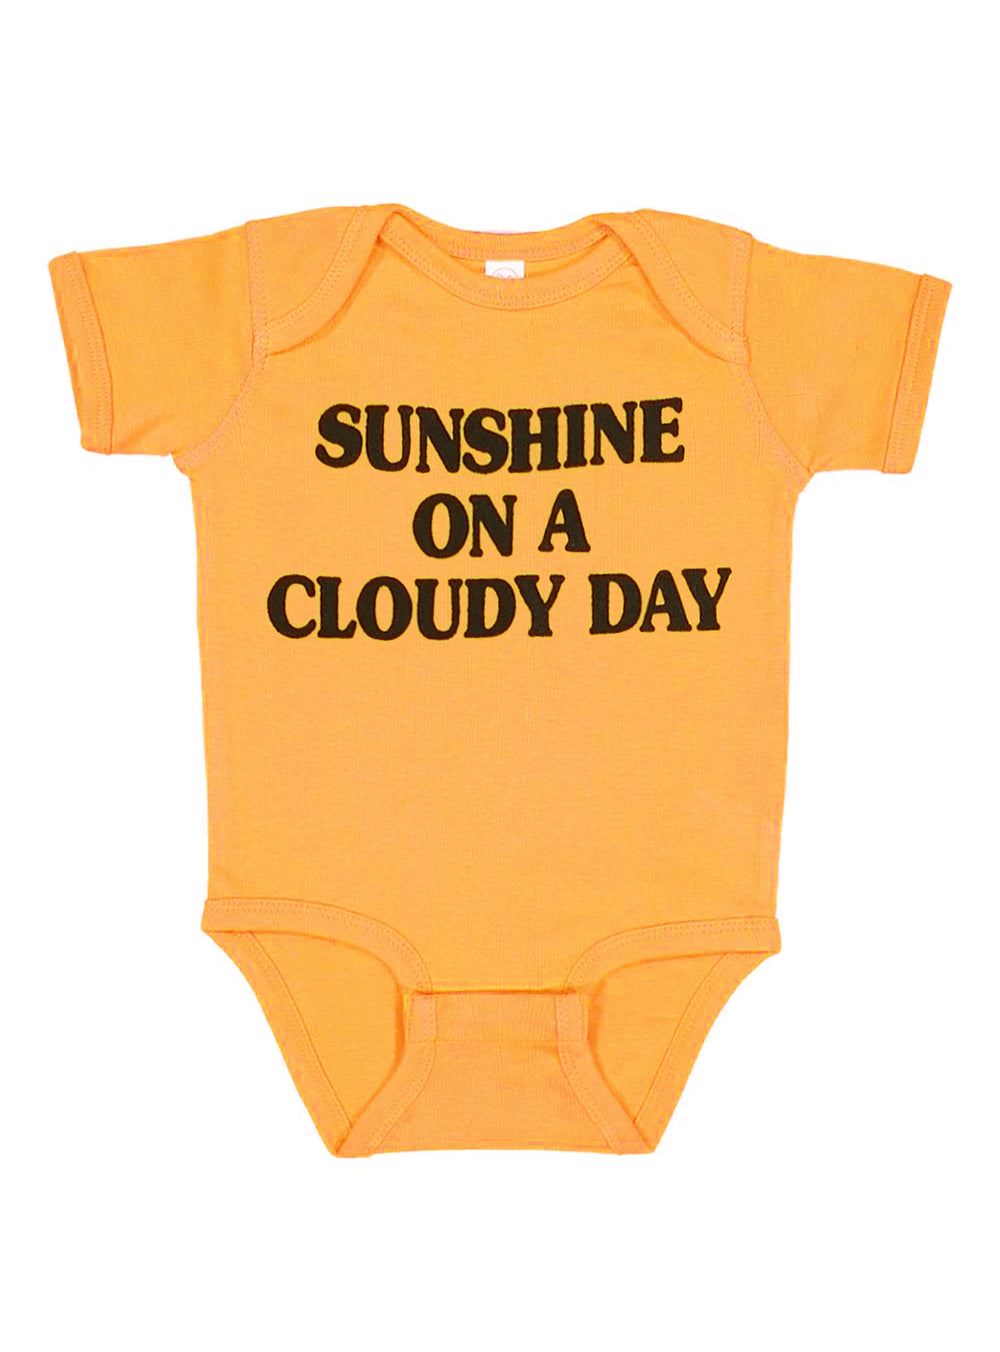 Sunshine On A Cloudy Day Baby Onesie